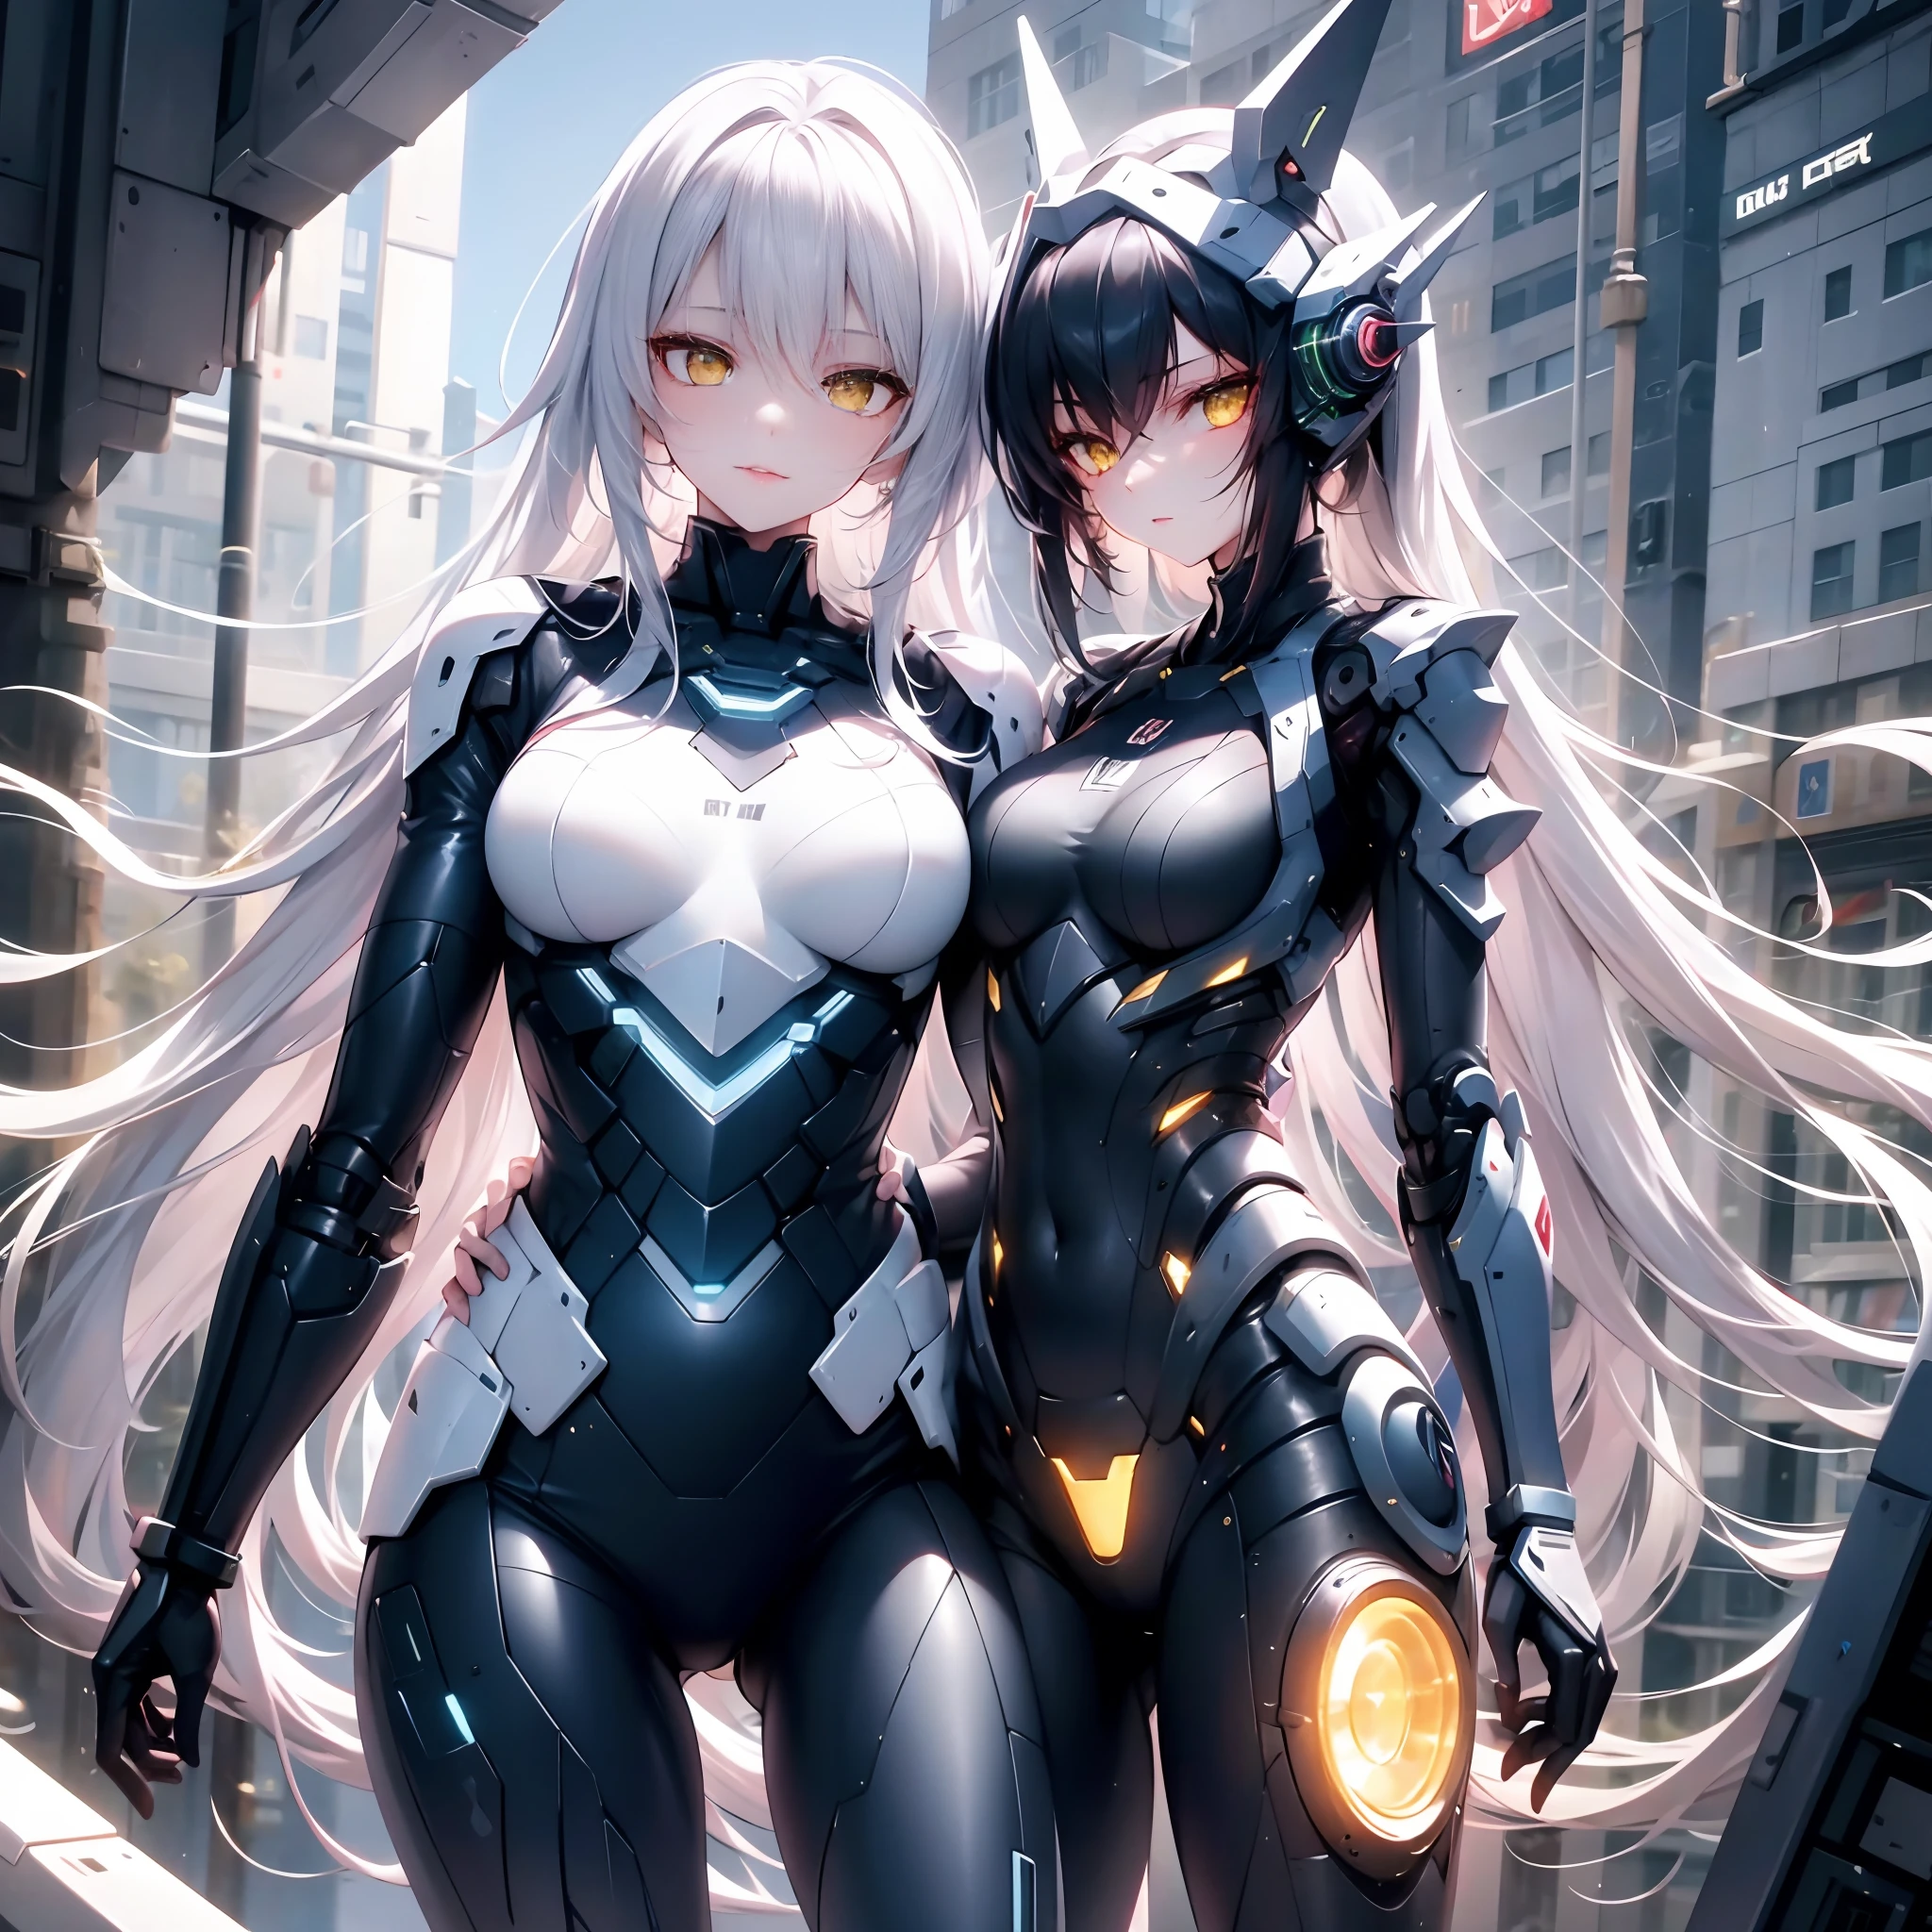 ，masterpiece, best quality，8k, ultra highreKSKS style, 1 mech girl, Surrounded by yellow lights, Gold eyes, White hair, Robotic arm, no smile, Ultra detailed, dynamicposes, Futuristic fantasy, cyber punk perssonage, Bolide, Battlefield ruins, Cubism, god rays, hatching (texture), Fujifilm, Masterpiece, highres, award winning